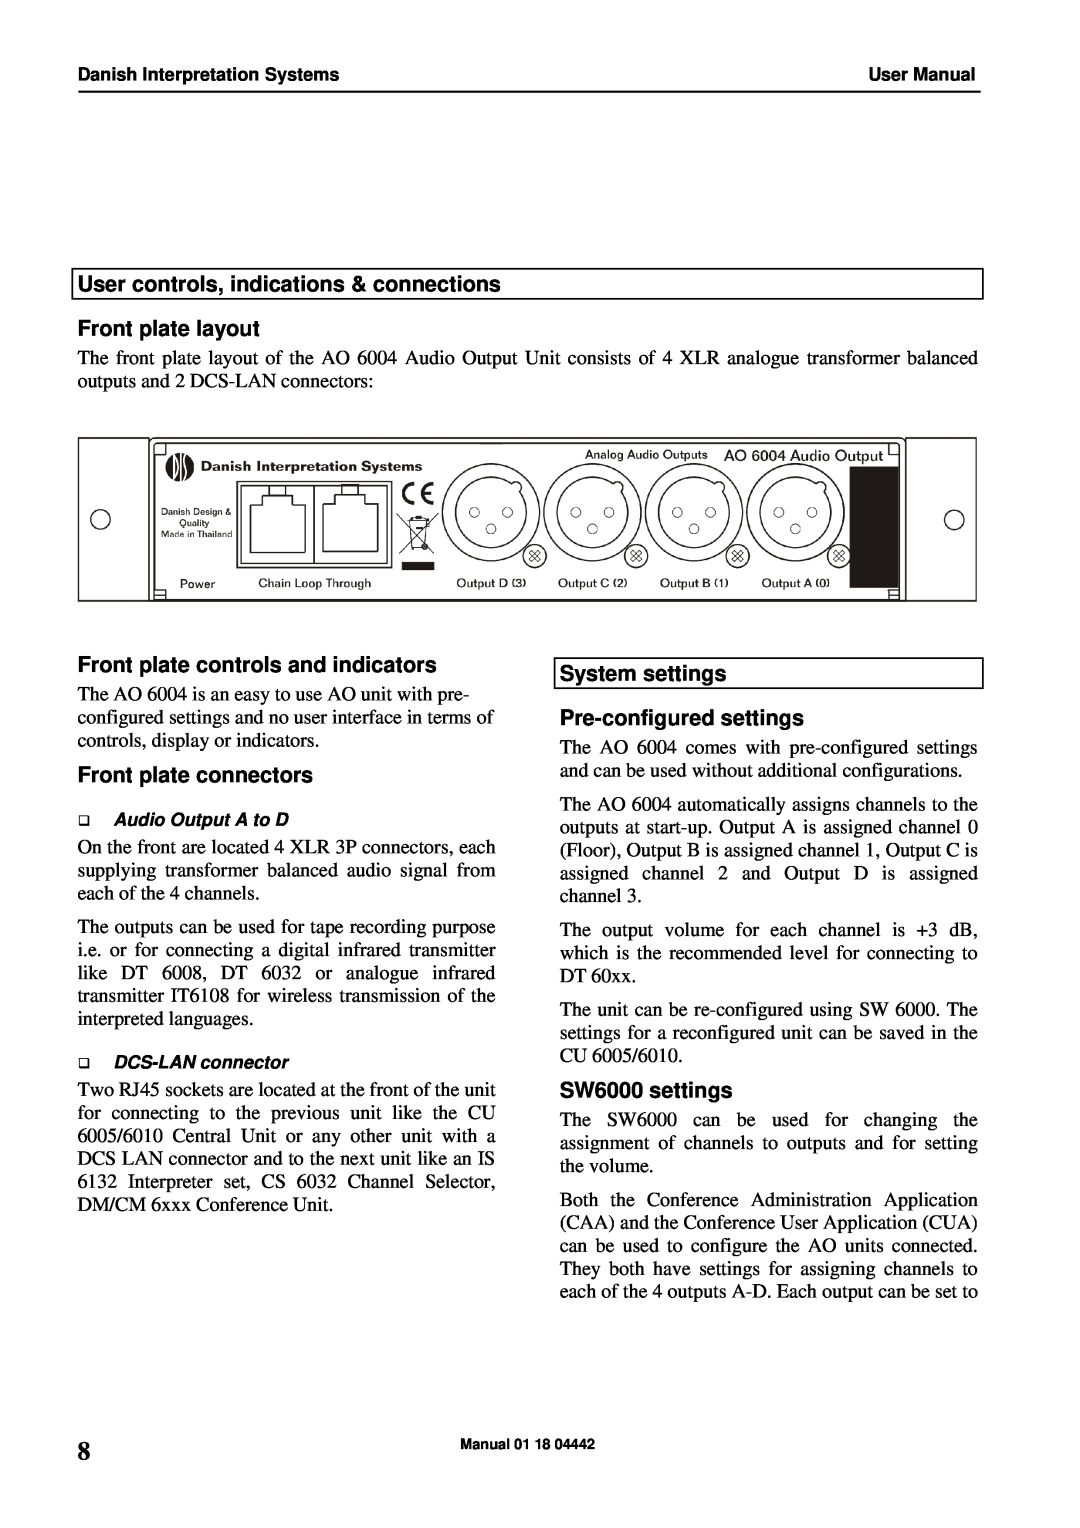 Listen Technologies AO 6004 User controls, indications & connections, Front plate layout, Front plate connectors 